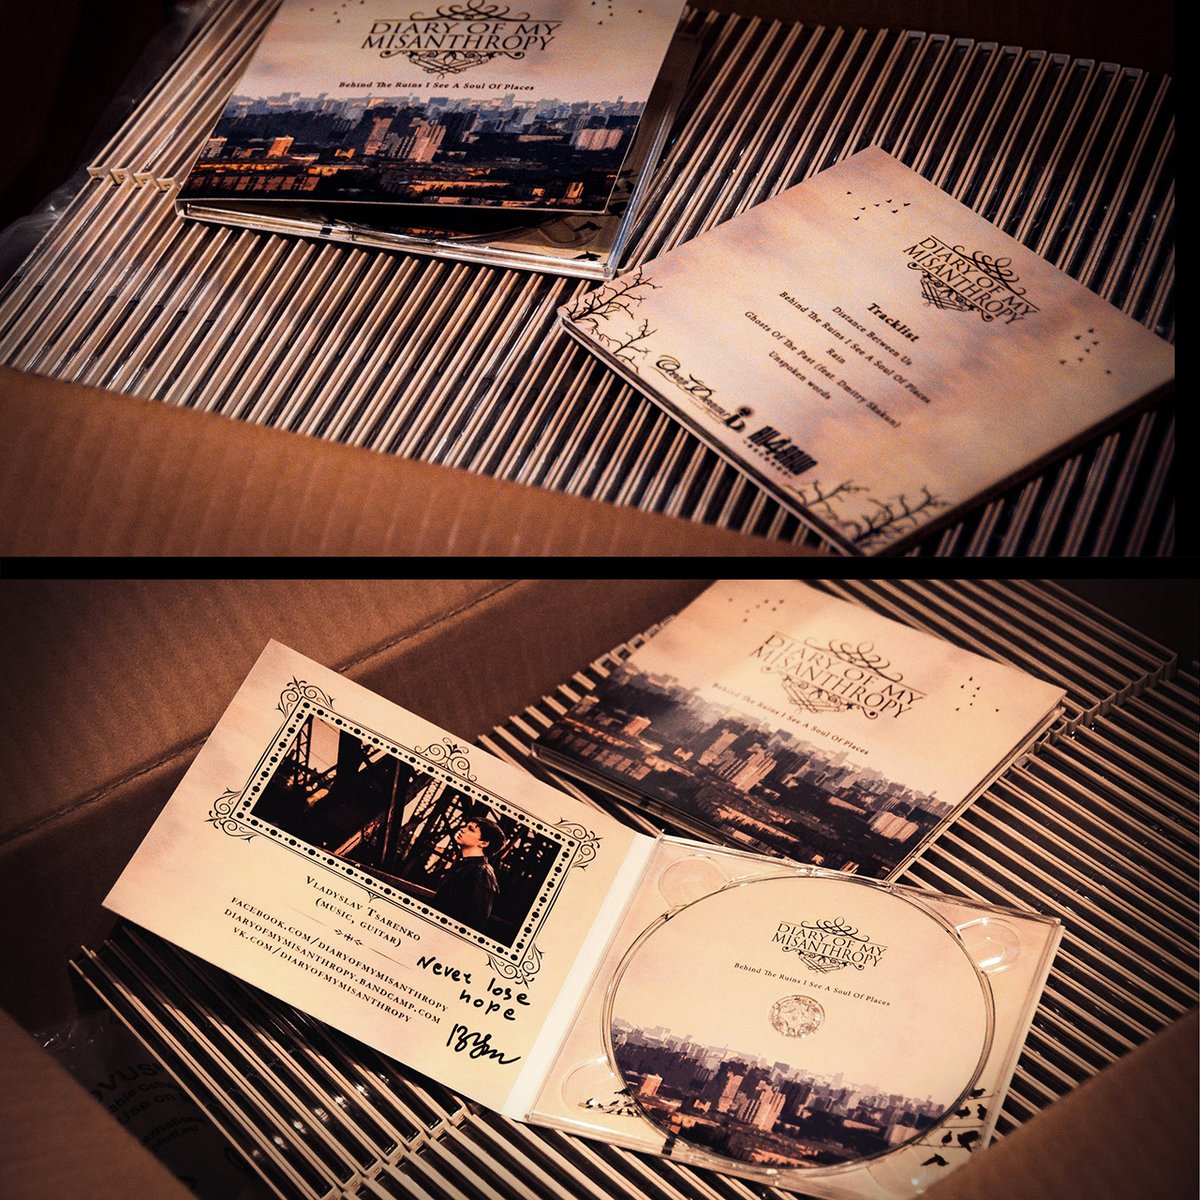 Image of EP "Behind the Ruins I Sea a Soul of Places" 4-panel DIGIPAK